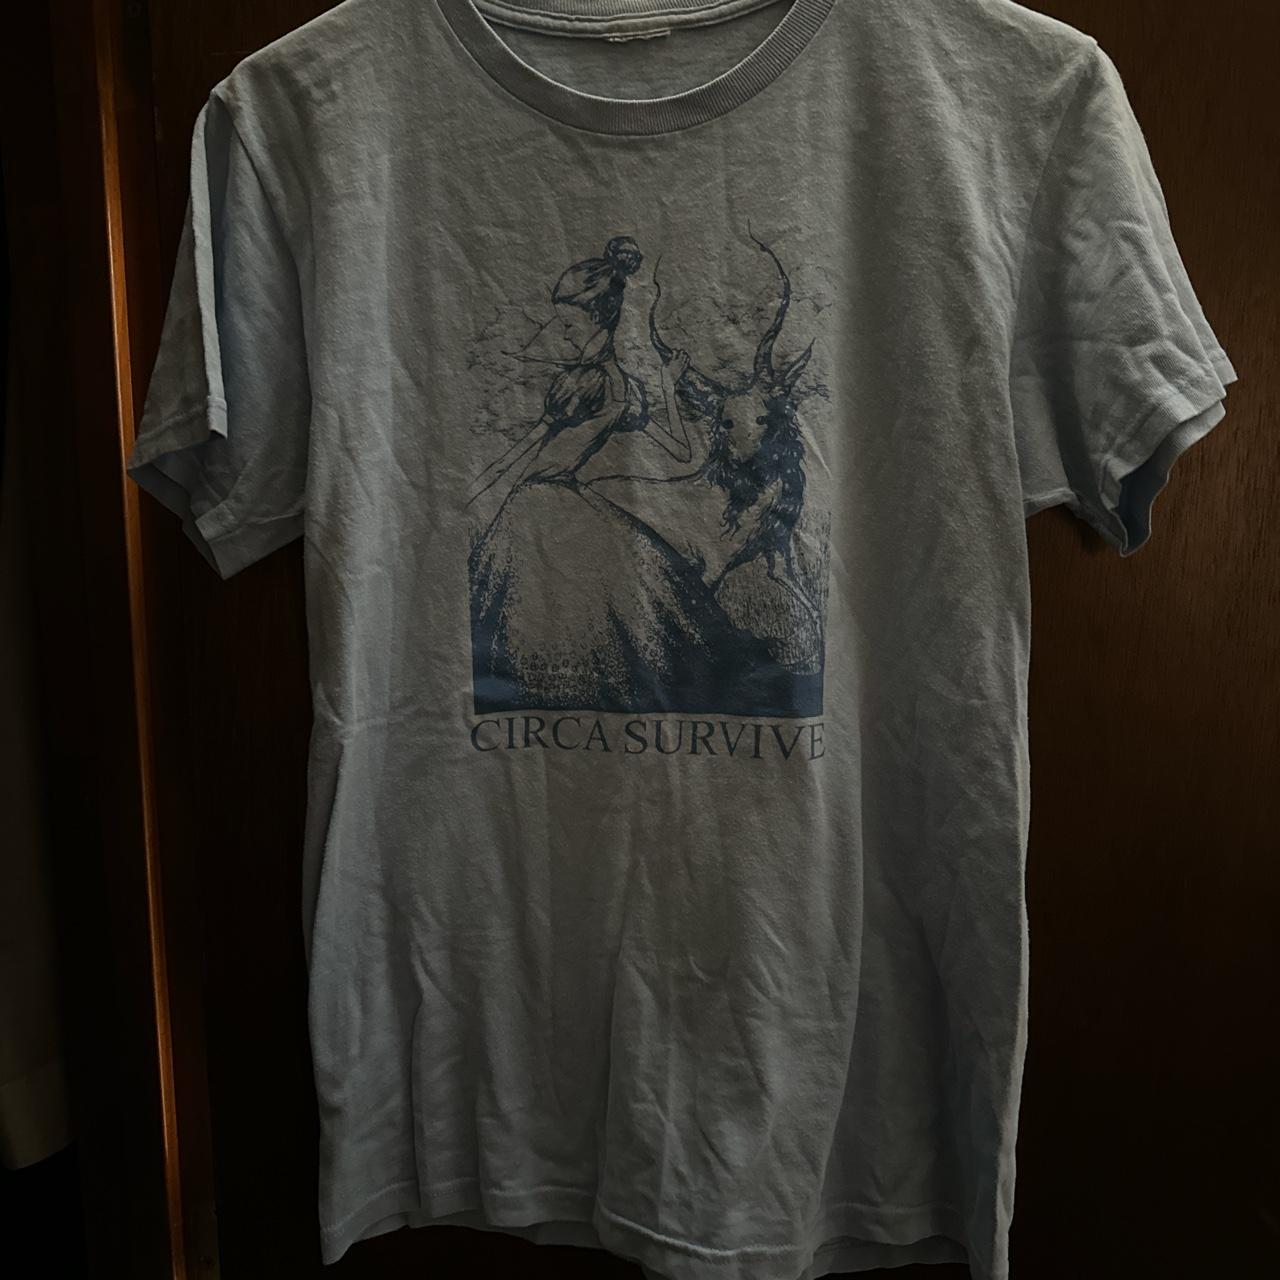 Circa Survive t shirt. This is one of the first... - Depop